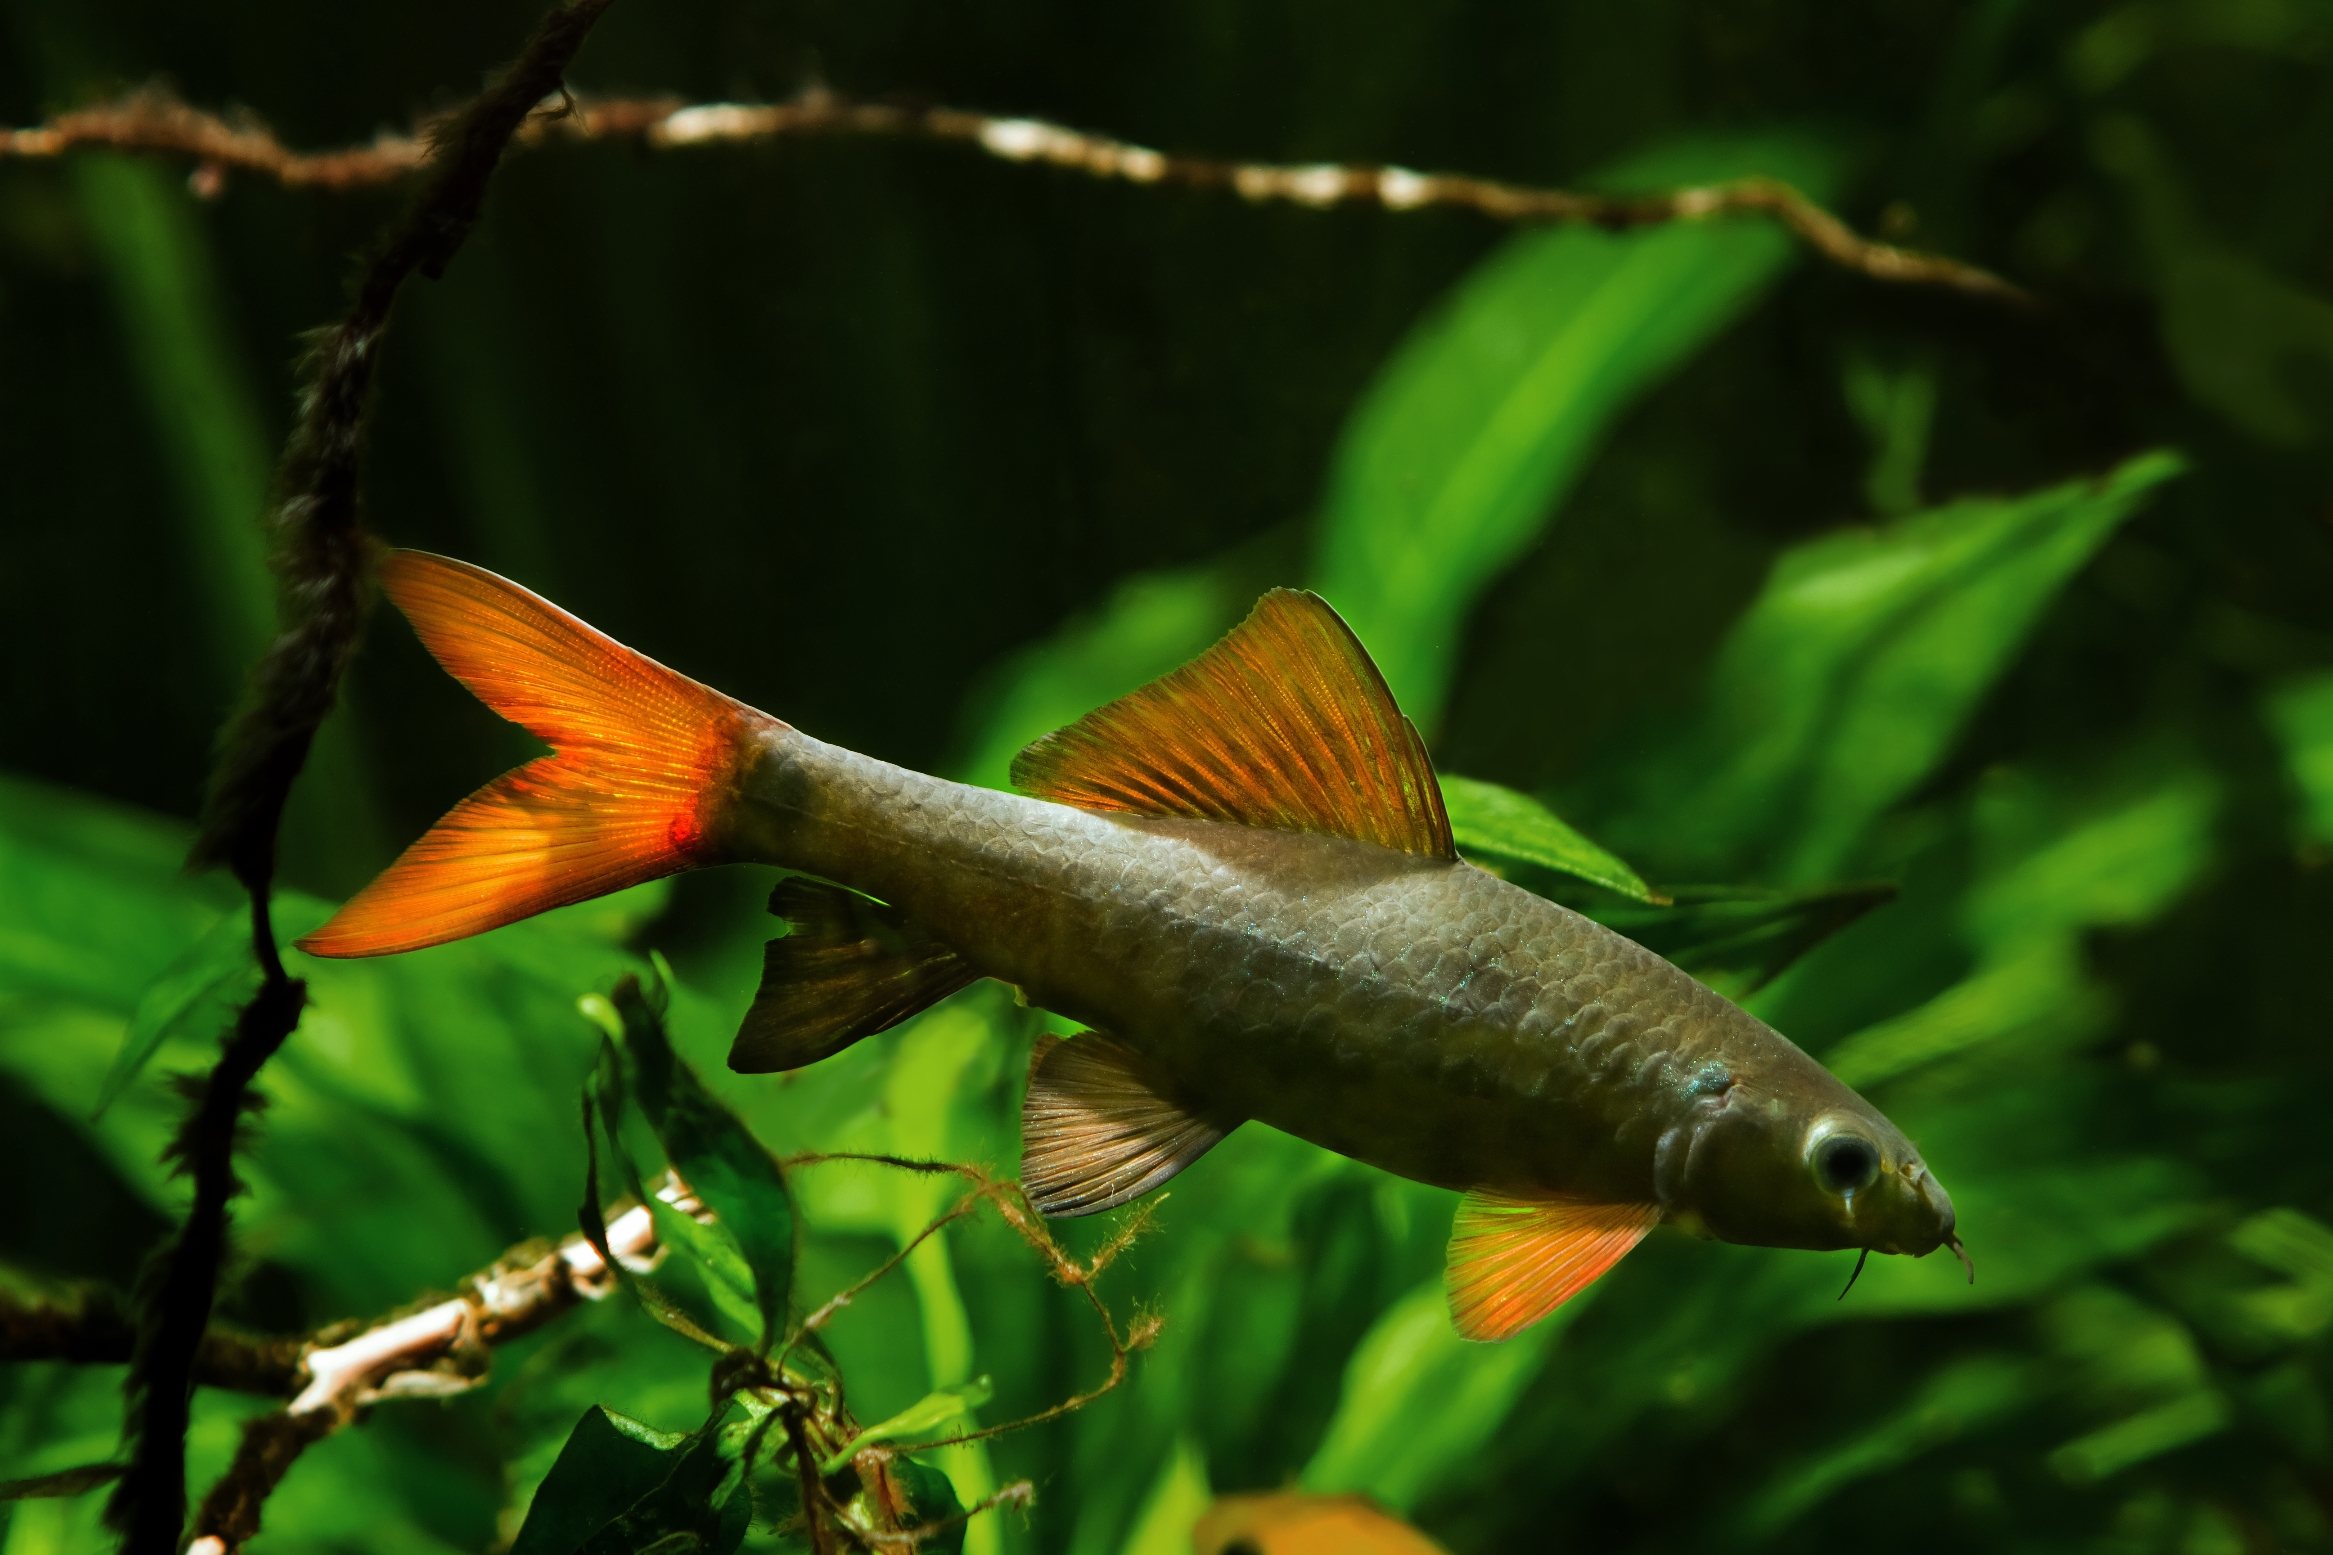 rainbow shark or sharkminnow, popular and useful freshwater cleaner adult fish Epalzeorhynchos frenatus in nature aquarium with bright healthy vegetation and driftwood